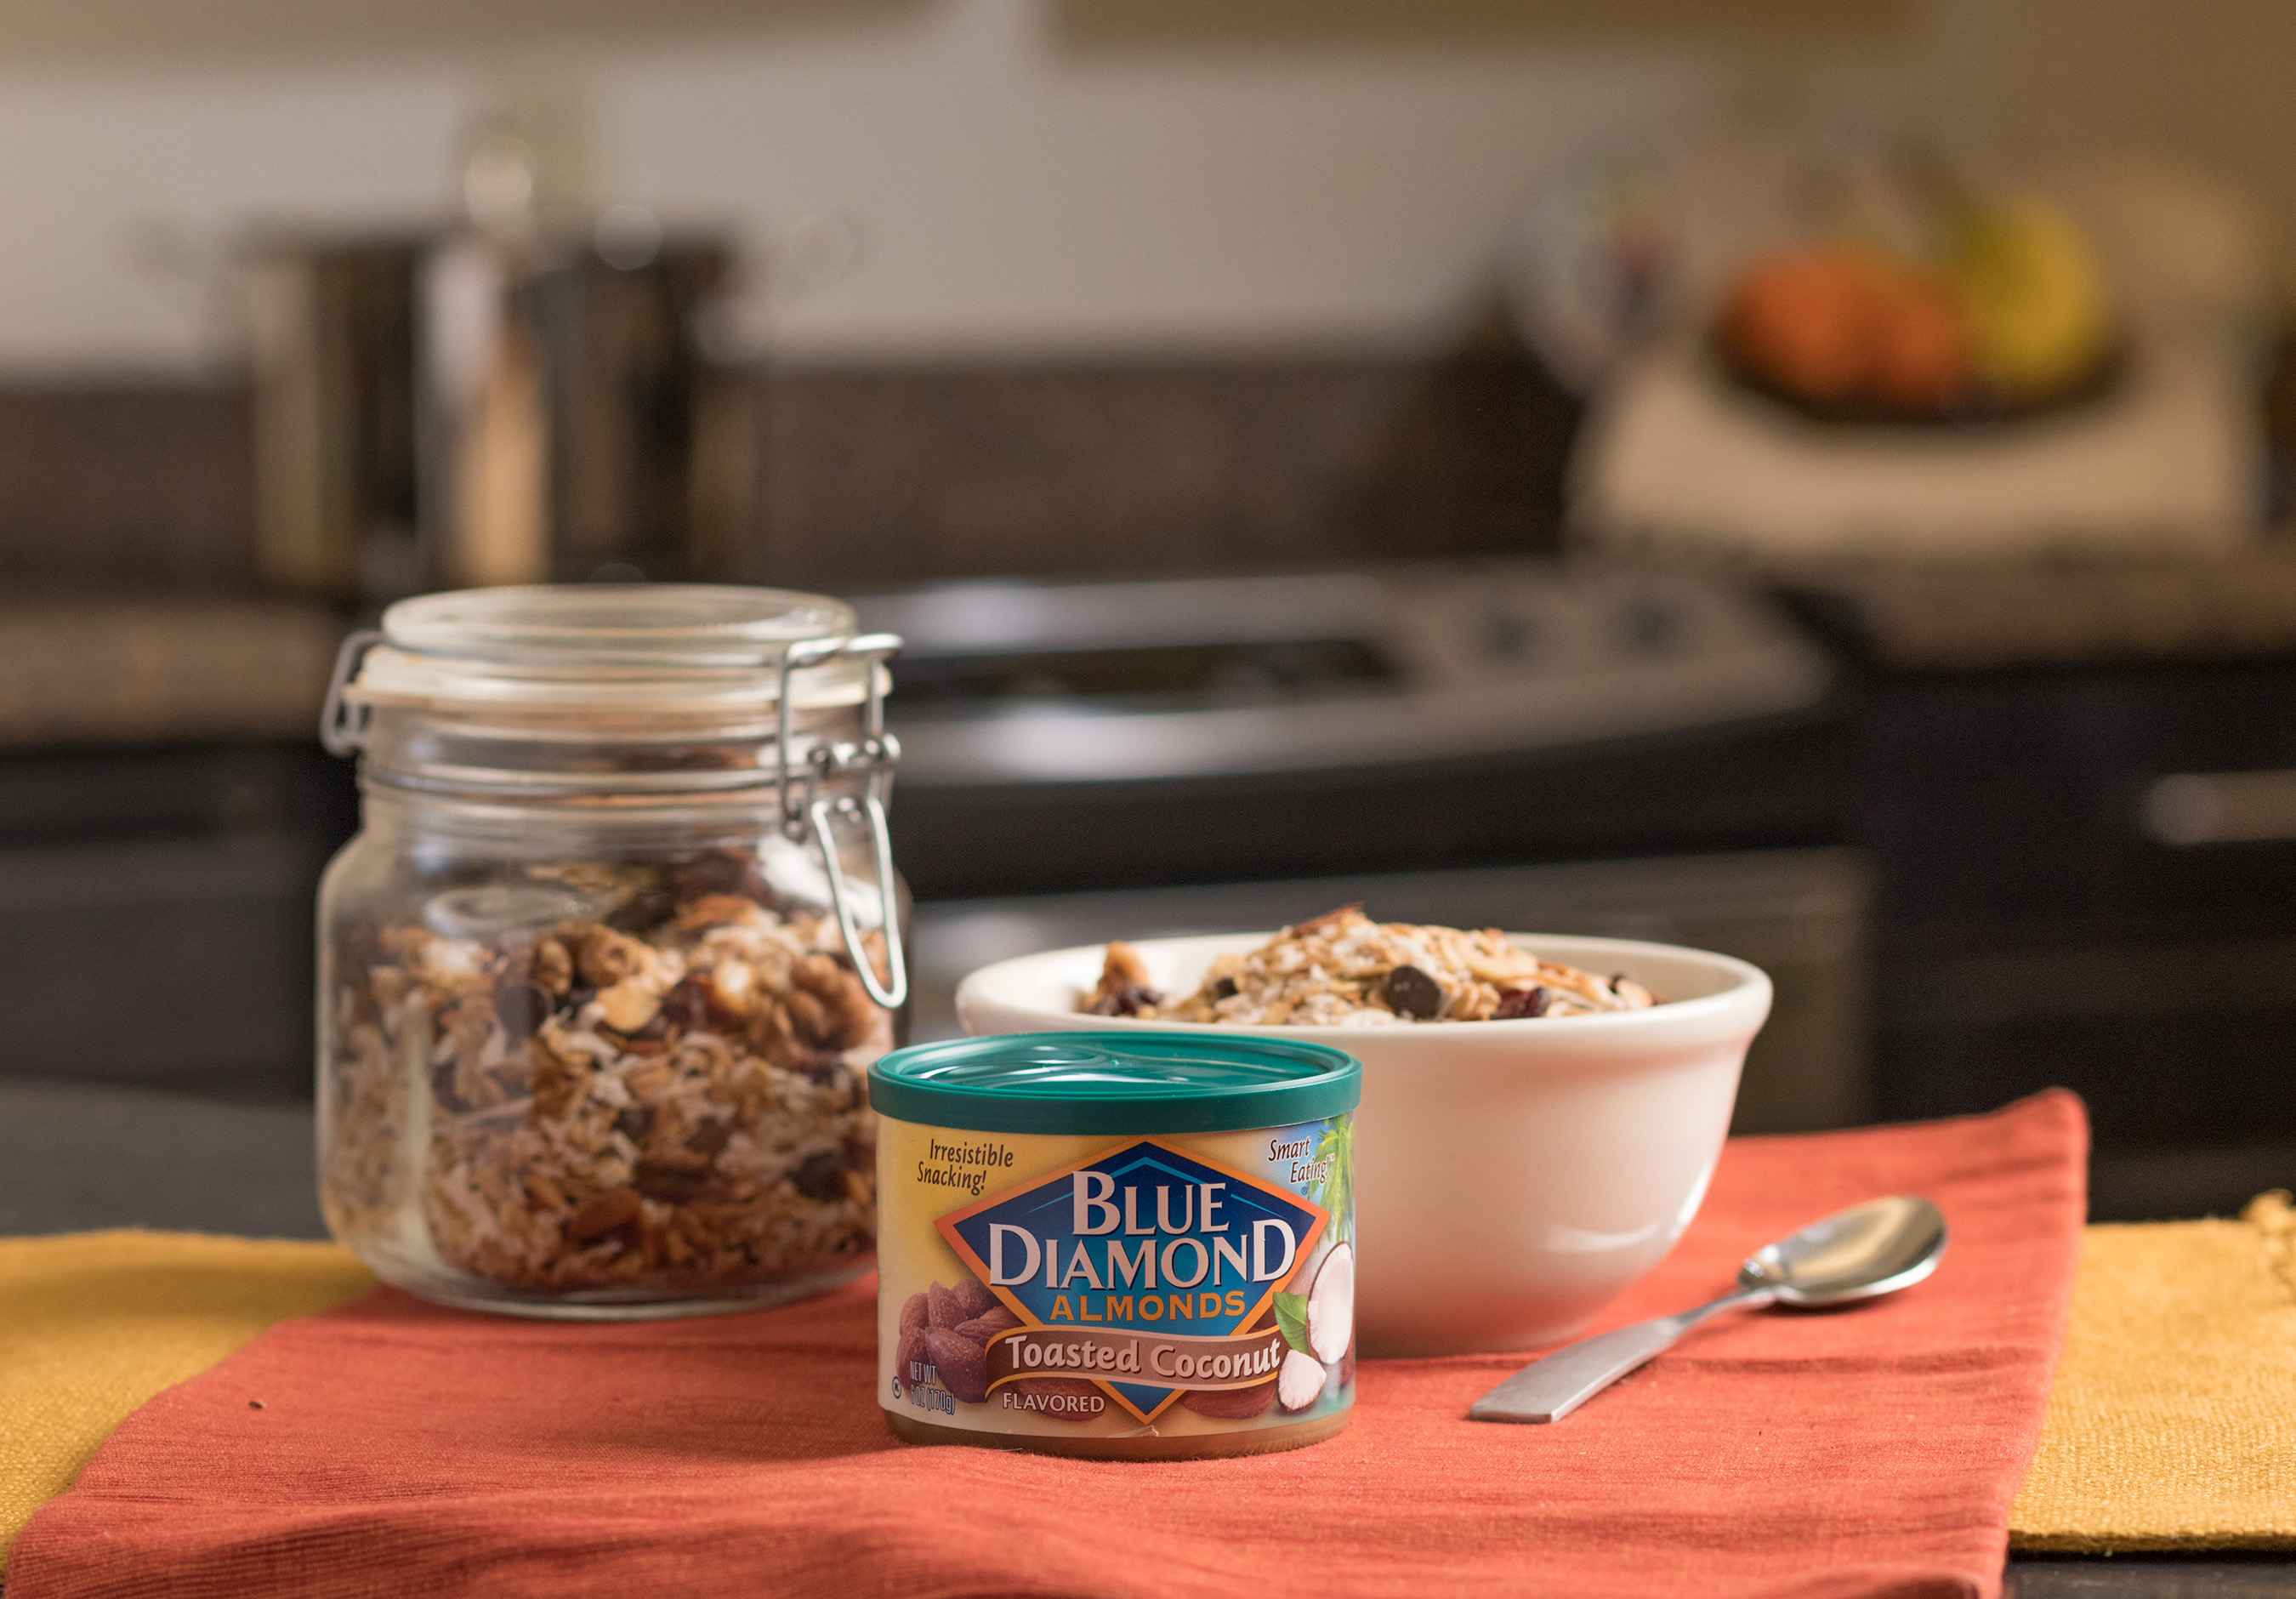 The Classic Granola with Toasted Coconut Almonds puts a flavorful twist on a traditional breakfast item by baking granola with Blue Diamond Toasted Coconut almonds.